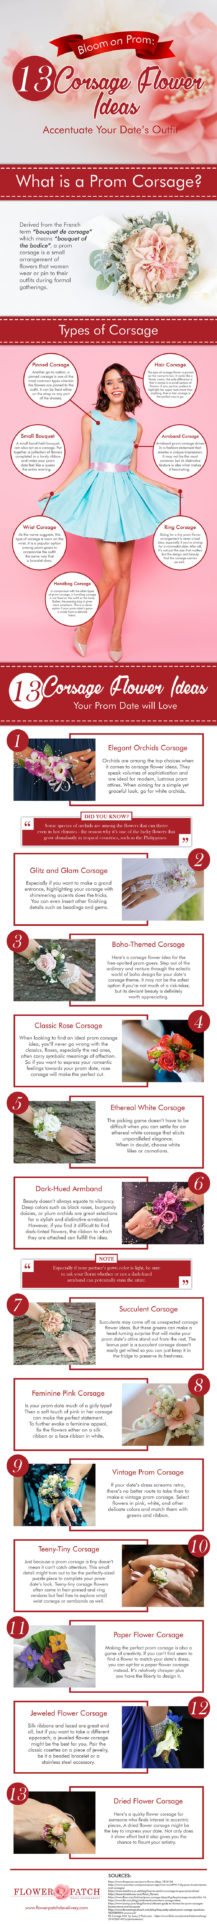 13 Corsage Flower Ideas for Your Prom Night